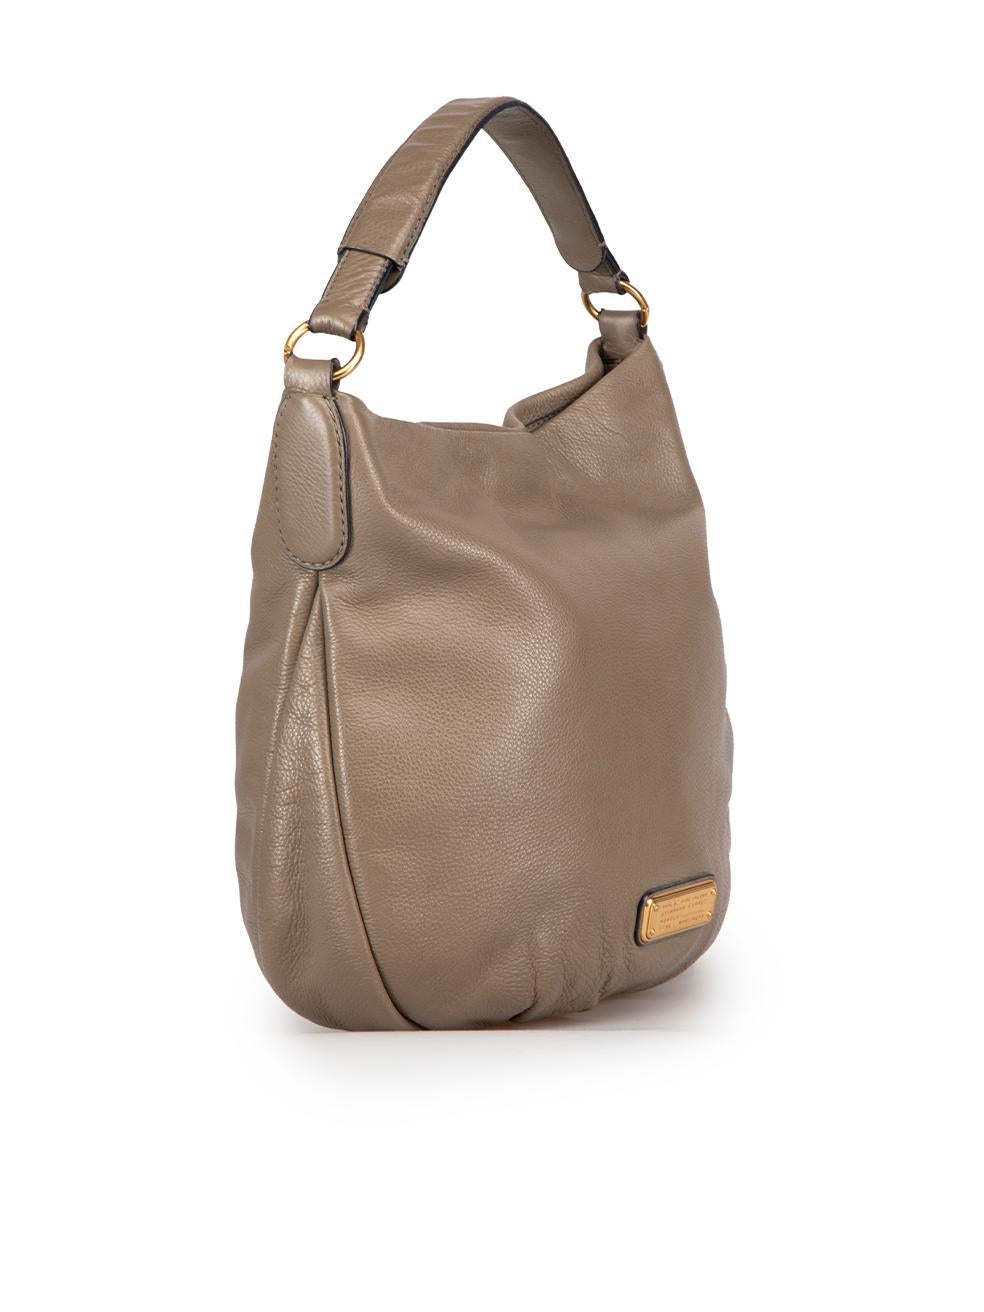 CONDITION is Very good. Minimal wear to bag is evident. Minimal wear to the underside of the top handle with scratches to the leather and there is a small mark at the rear of this used Marc by Marc Jacobs designer resale item. This item comes with